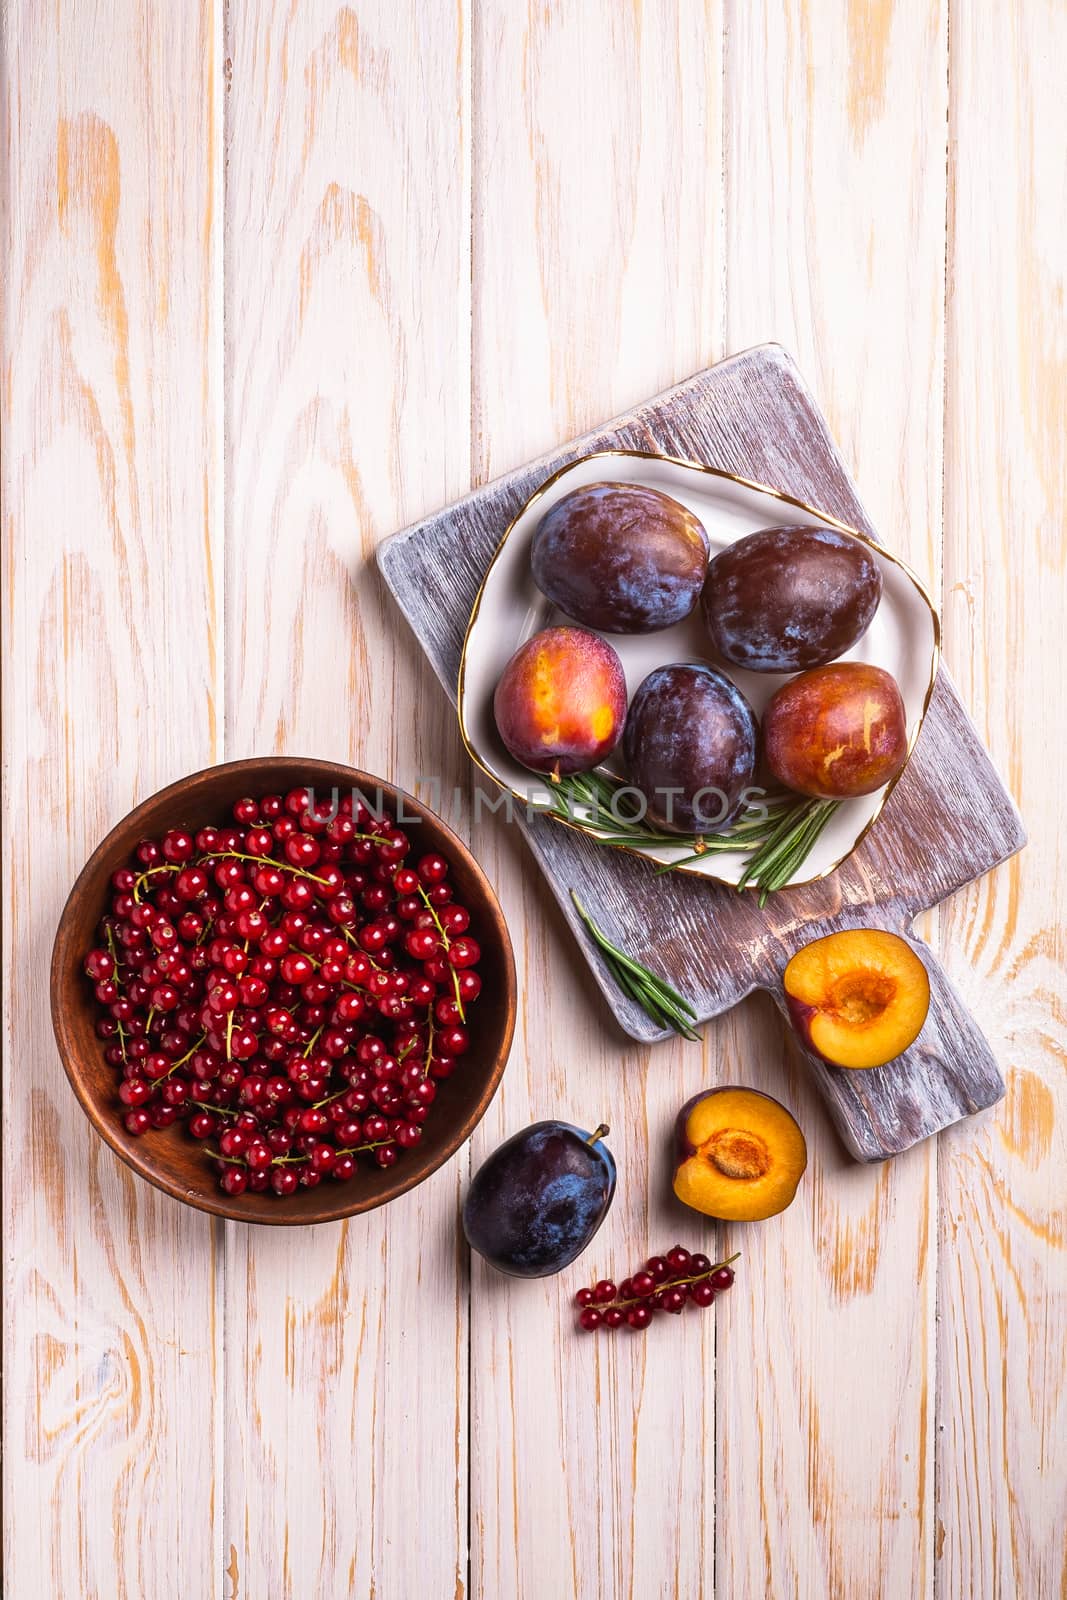 Fresh sweet plum fruits whole and sliced in plate with rosemary leaves on old cutting board with red currant berries in wooden bowl, wood table background, top view